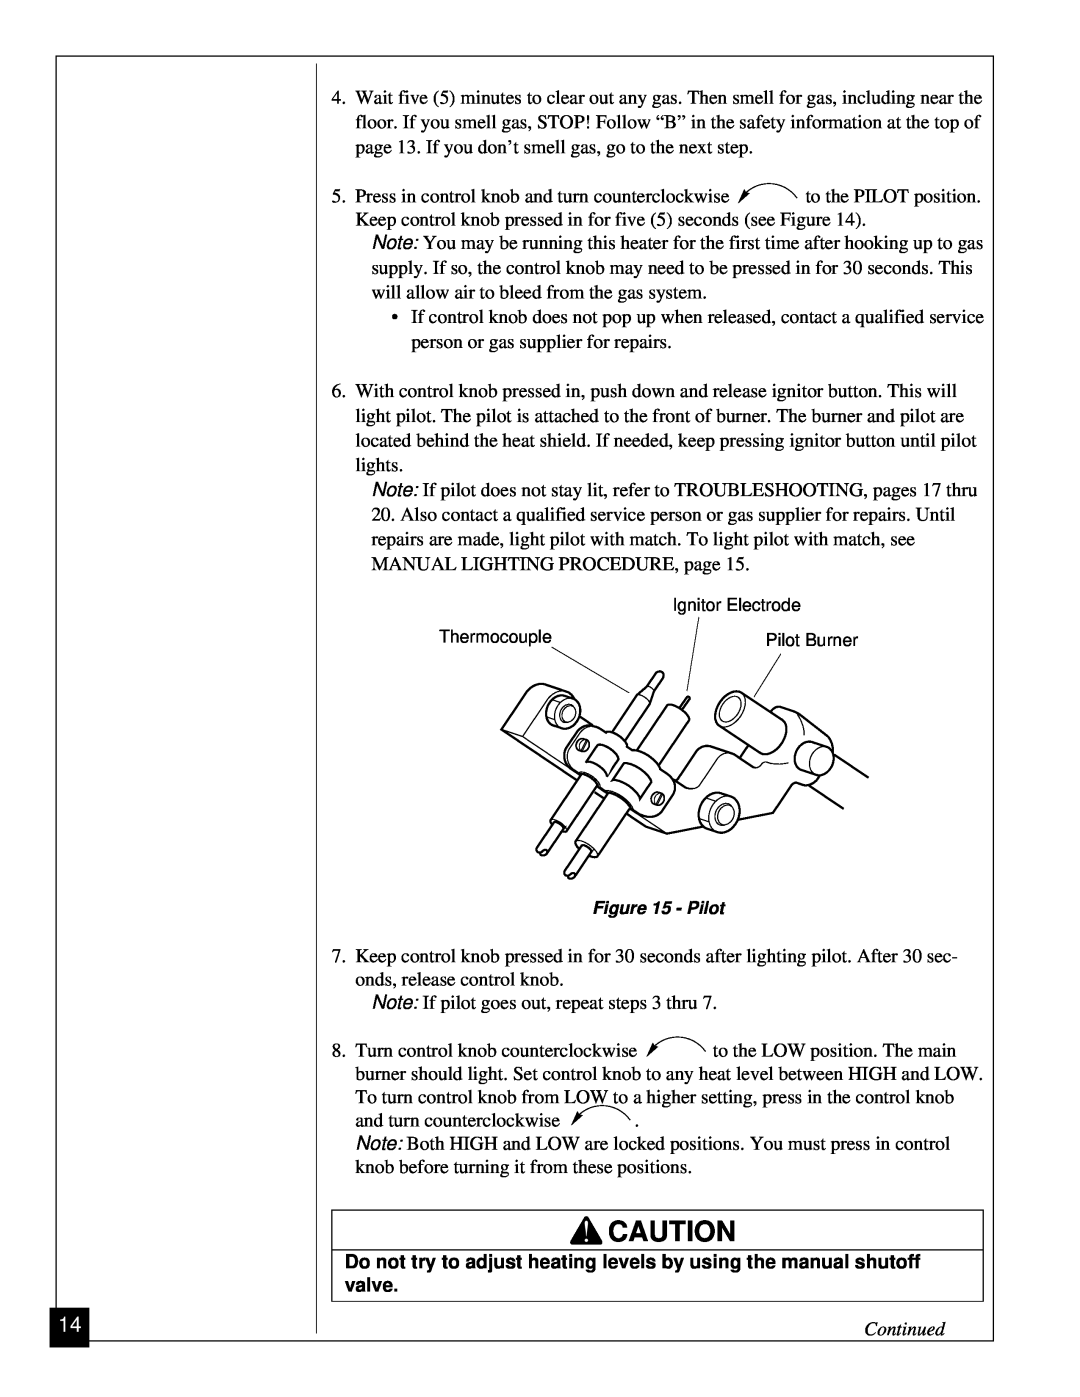 Desa VGP30 installation manual Note If pilot goes out, repeat steps 3 thru, Continued 